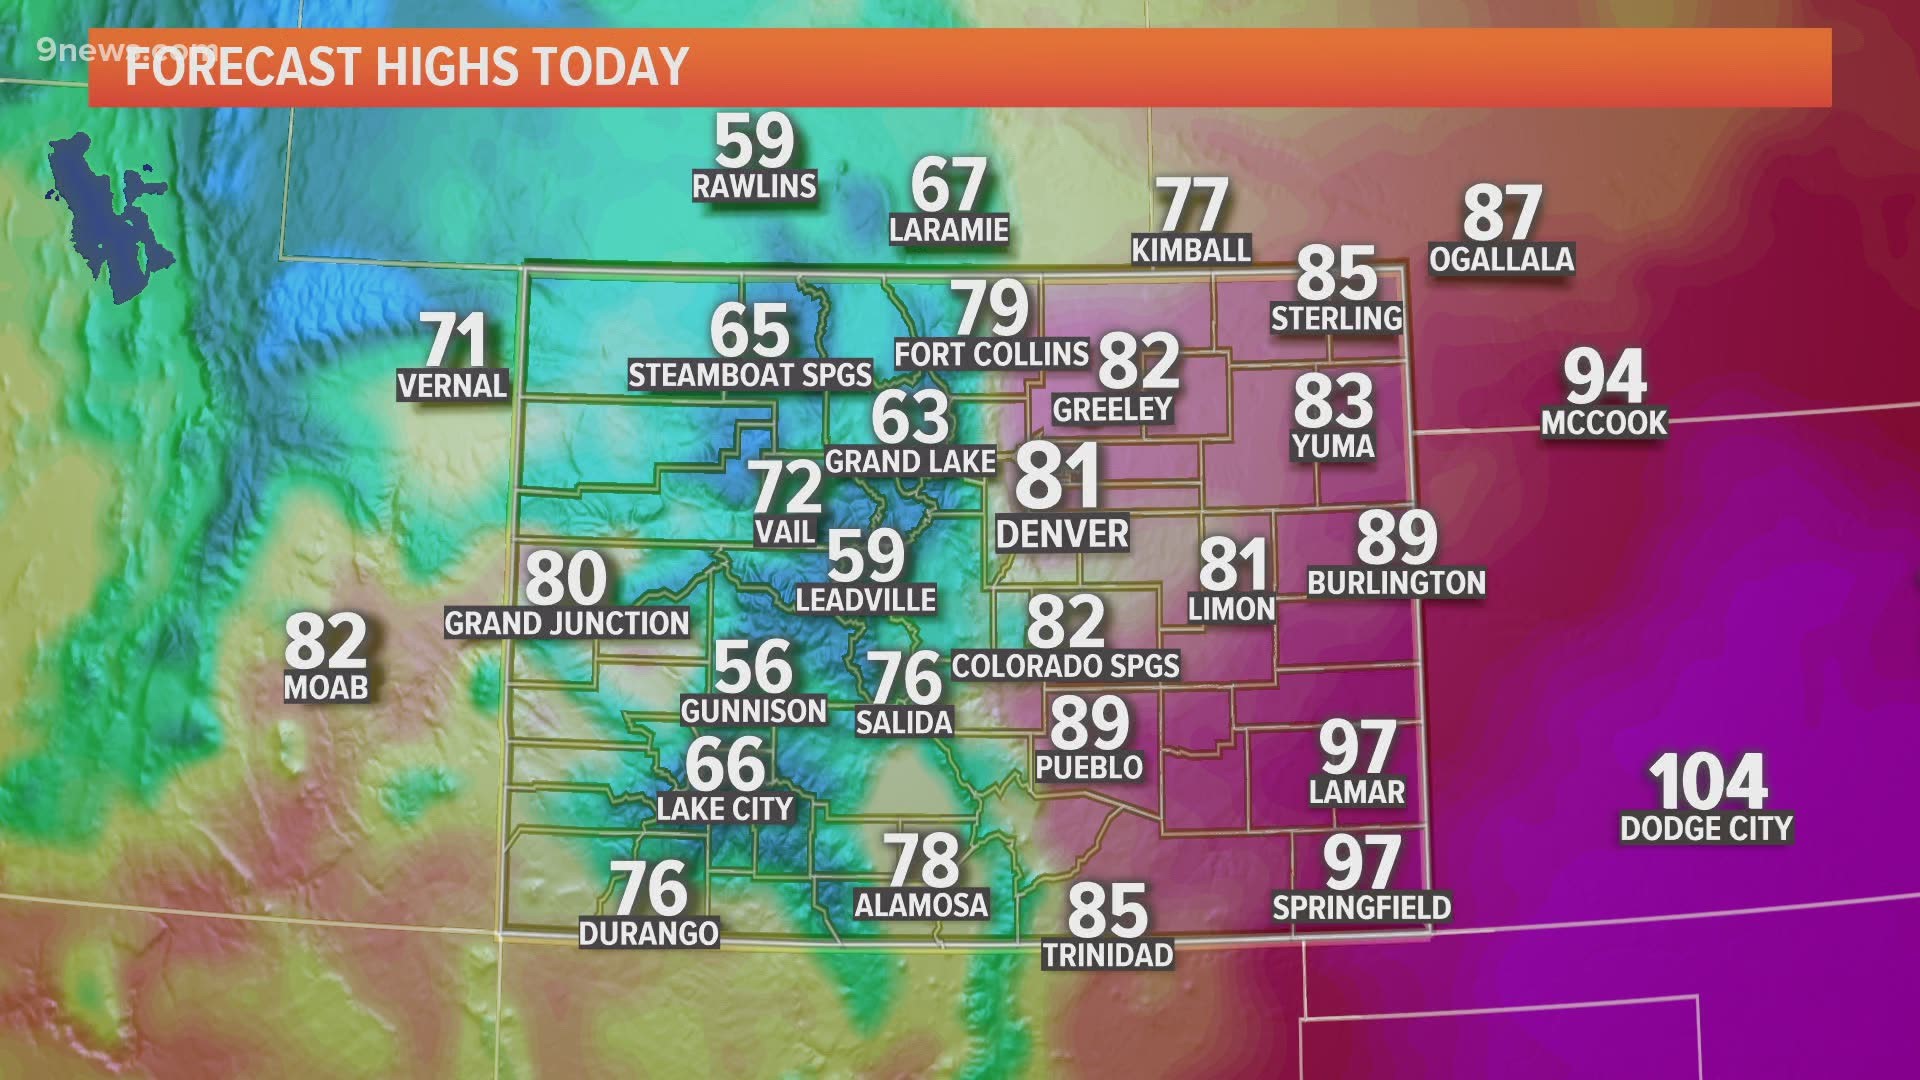 A cold front from western Colorado will bring some clouds and even a few light showers from 10 a.m. until 1 p.m.